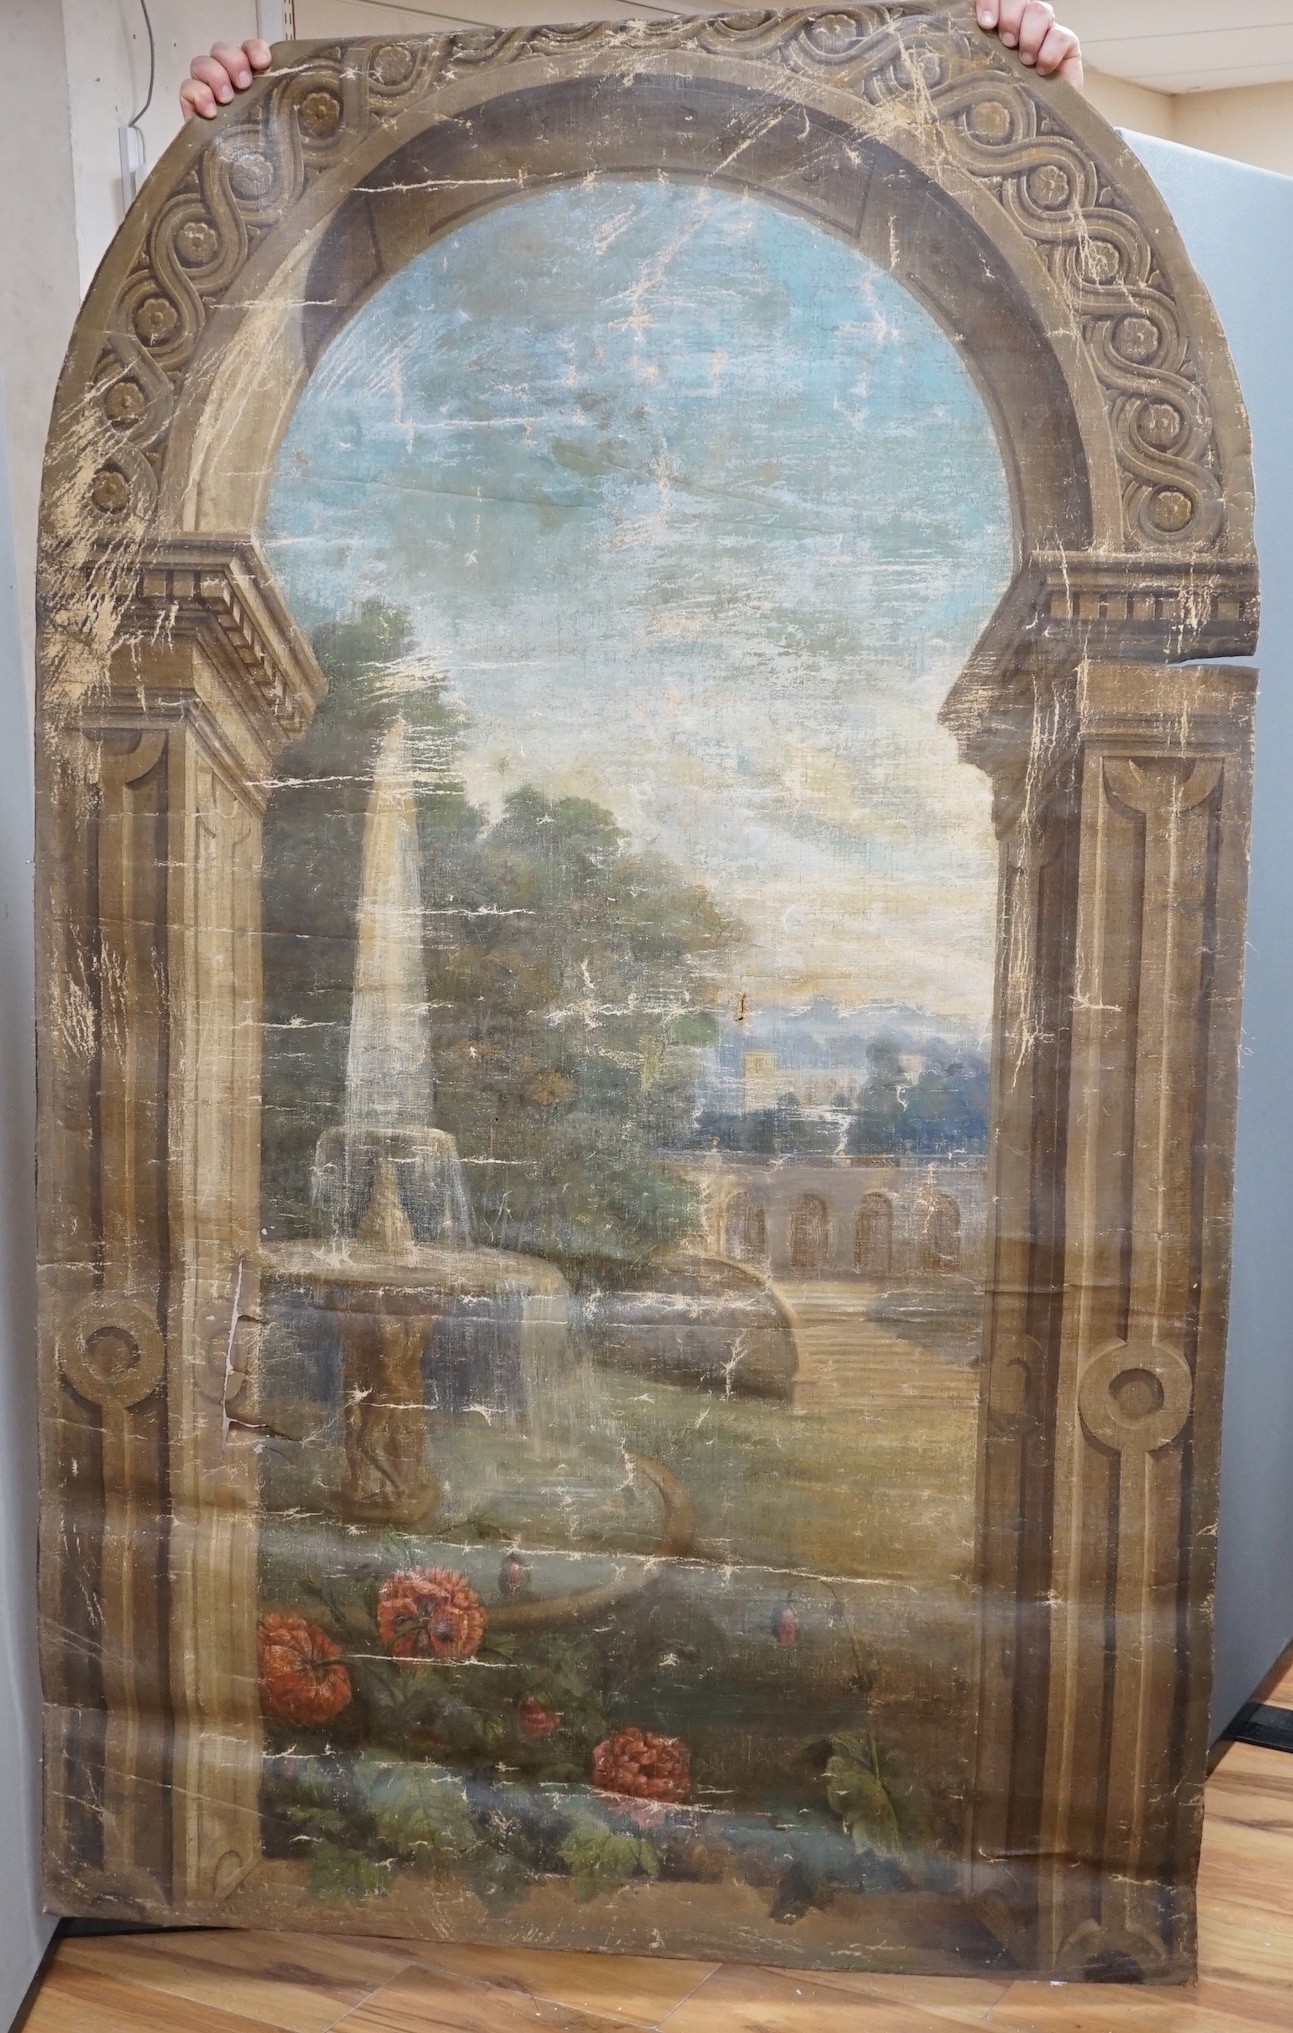 English School c.1900, set of six unstretched oils on canvas, Italianate landscapes painted for murals to be inset into arched niches, approximately 184 x 110cm